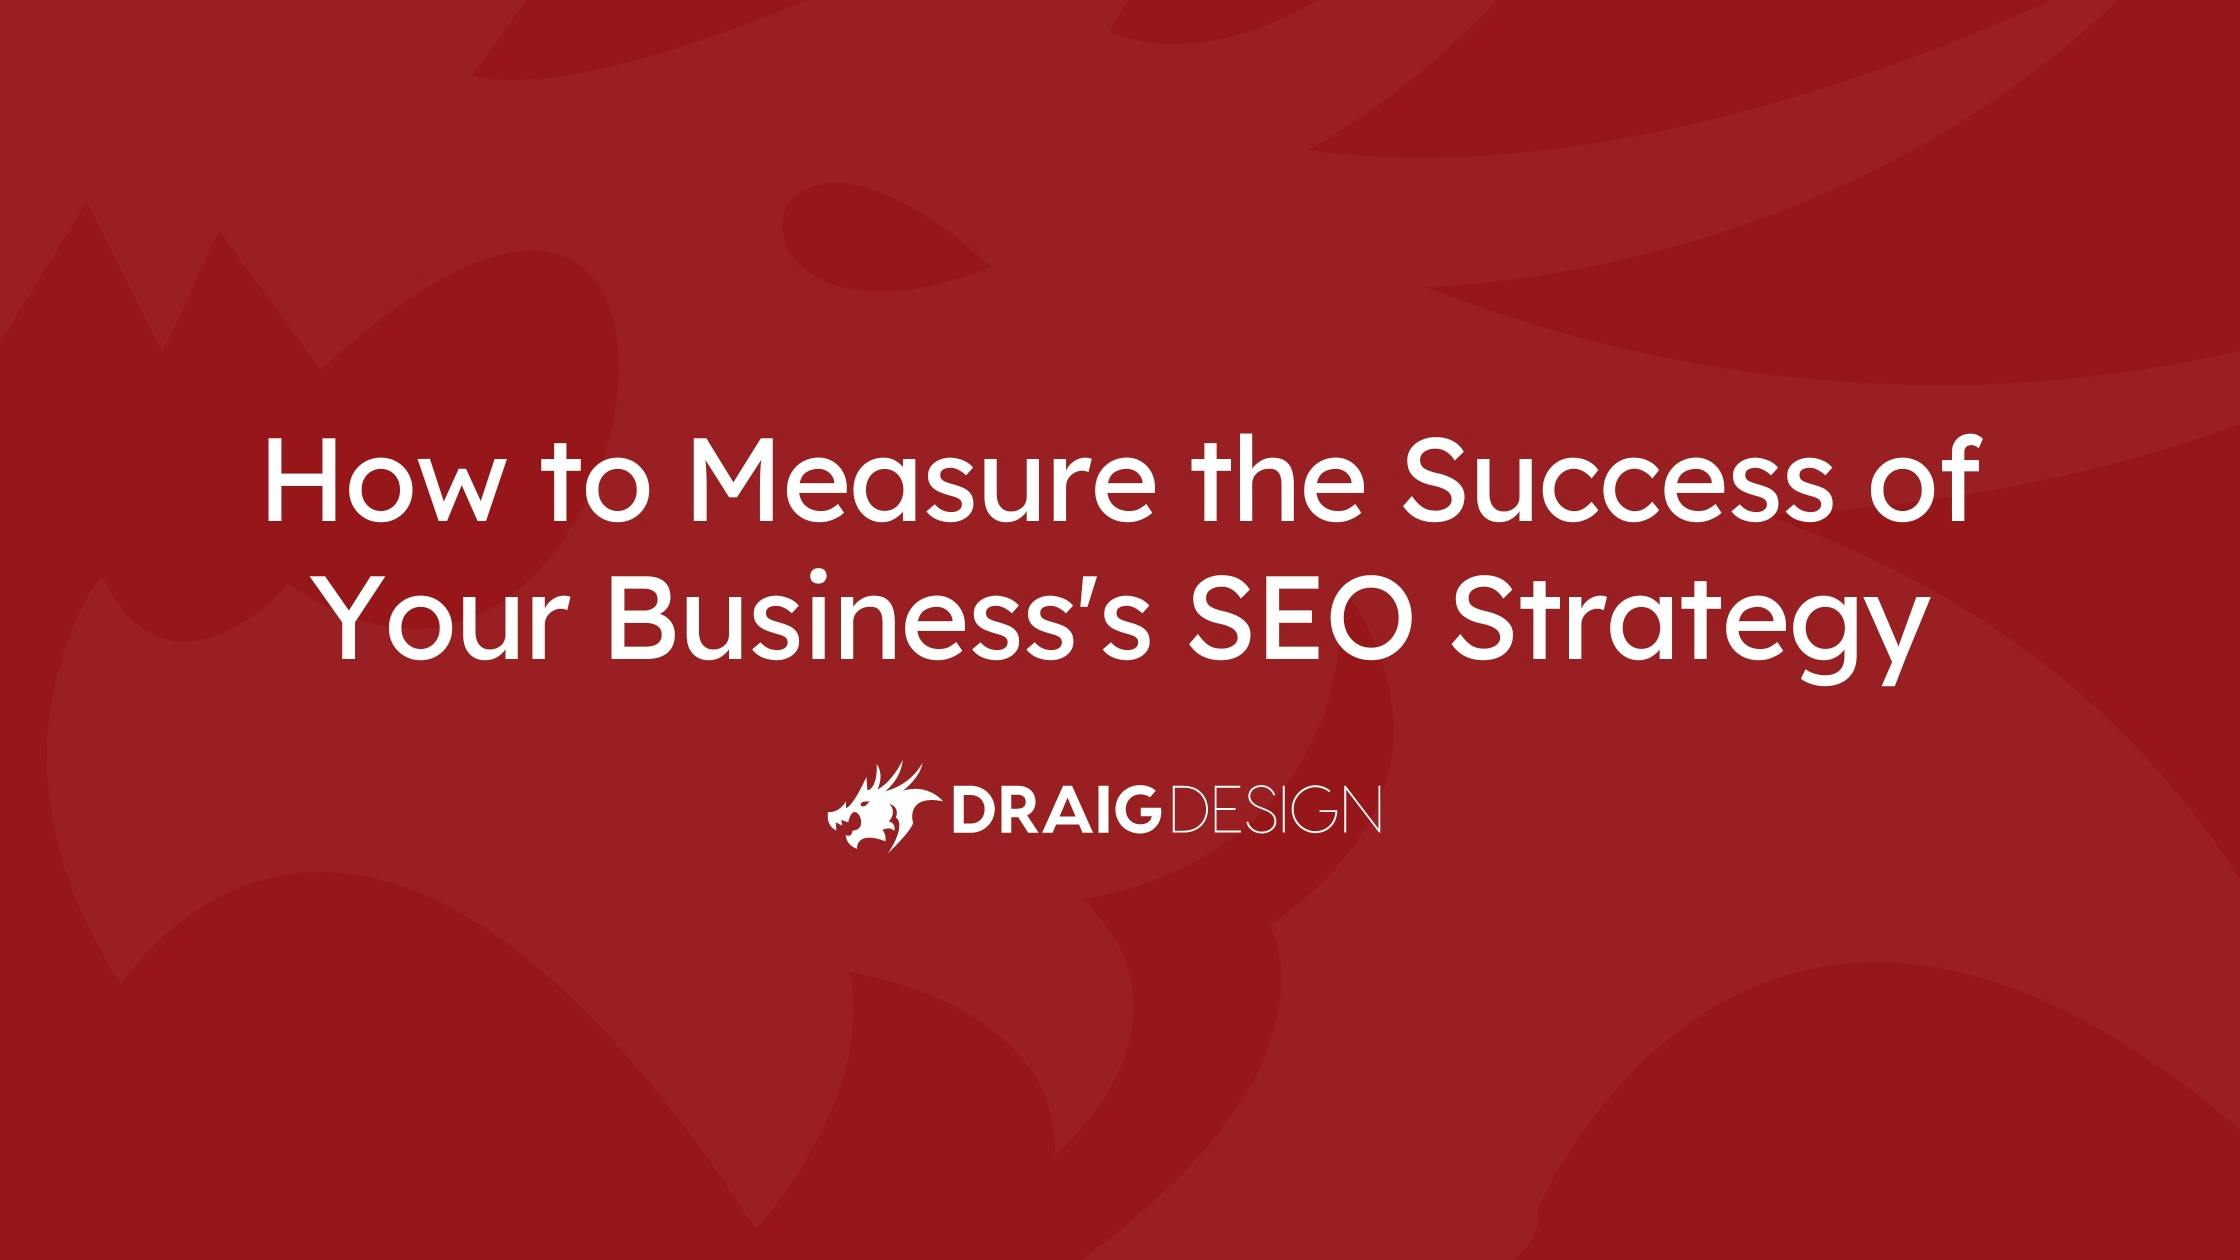 How to Measure the Success of Your Business's SEO Strategy